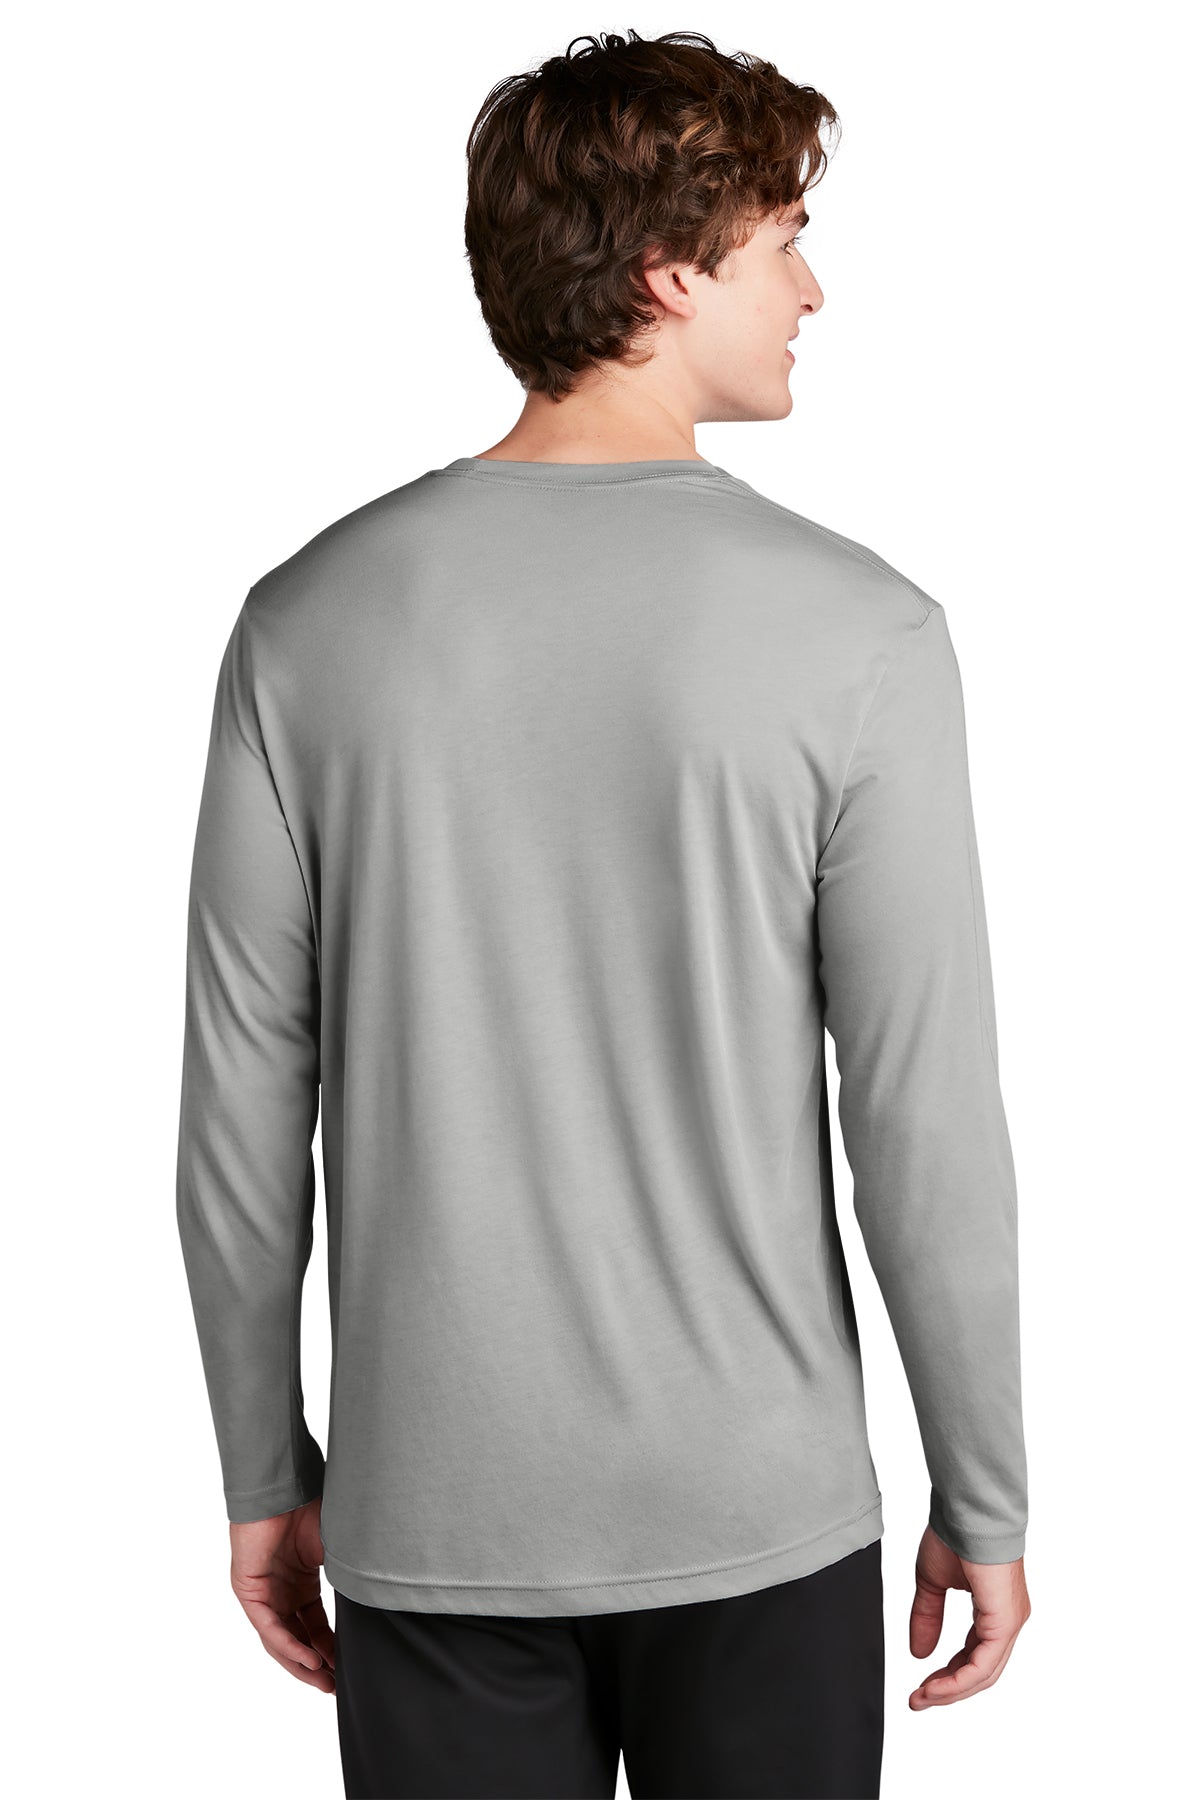 Sport-Tek Long Sleeve PosiCharge Competitor Cotton Touch Tee